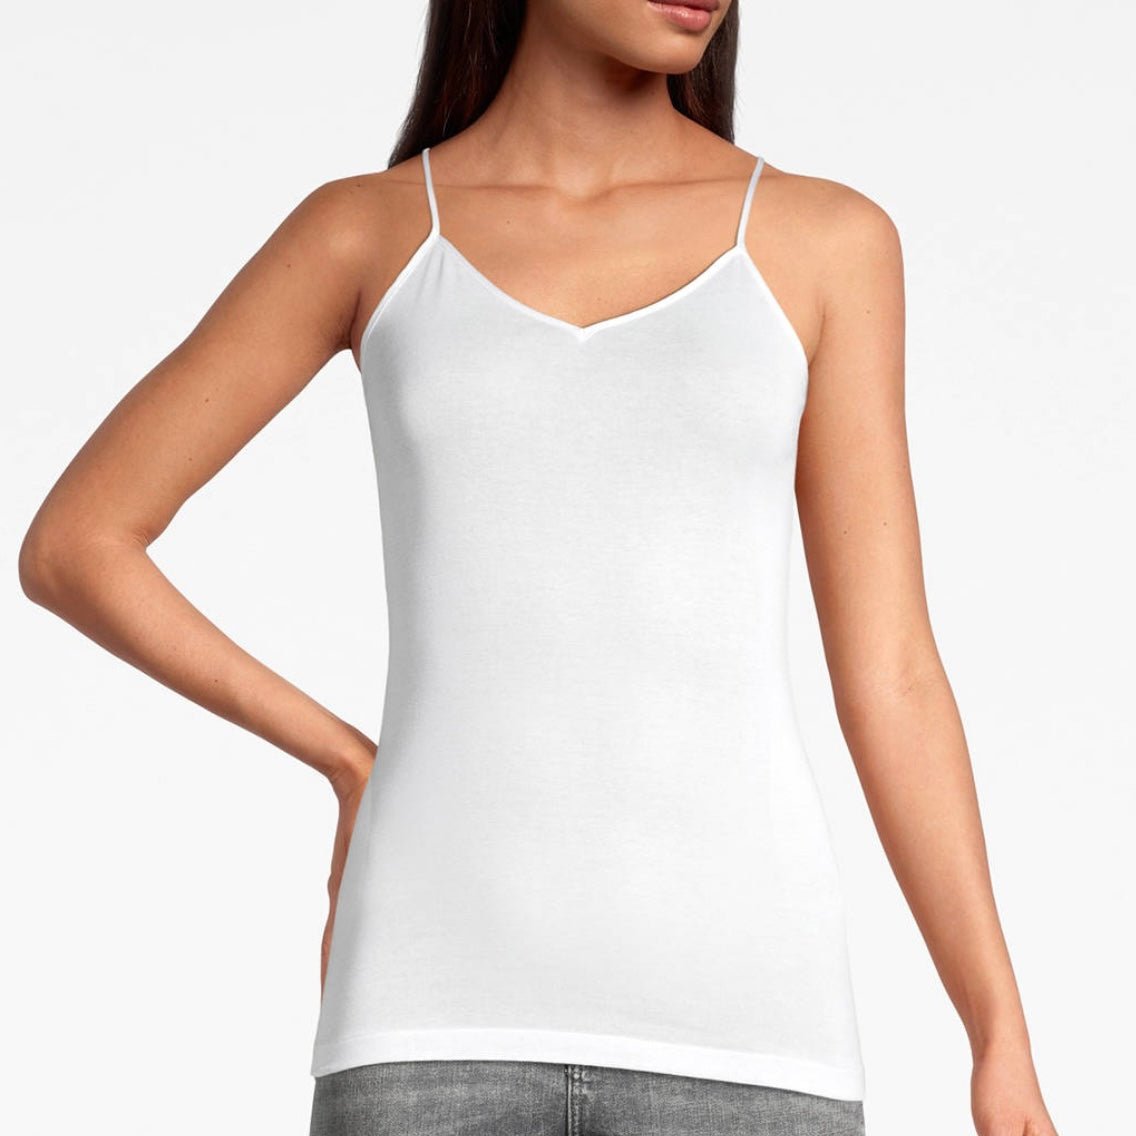 Oscalito - Cotton Tank Top - More Colors - About the Bra